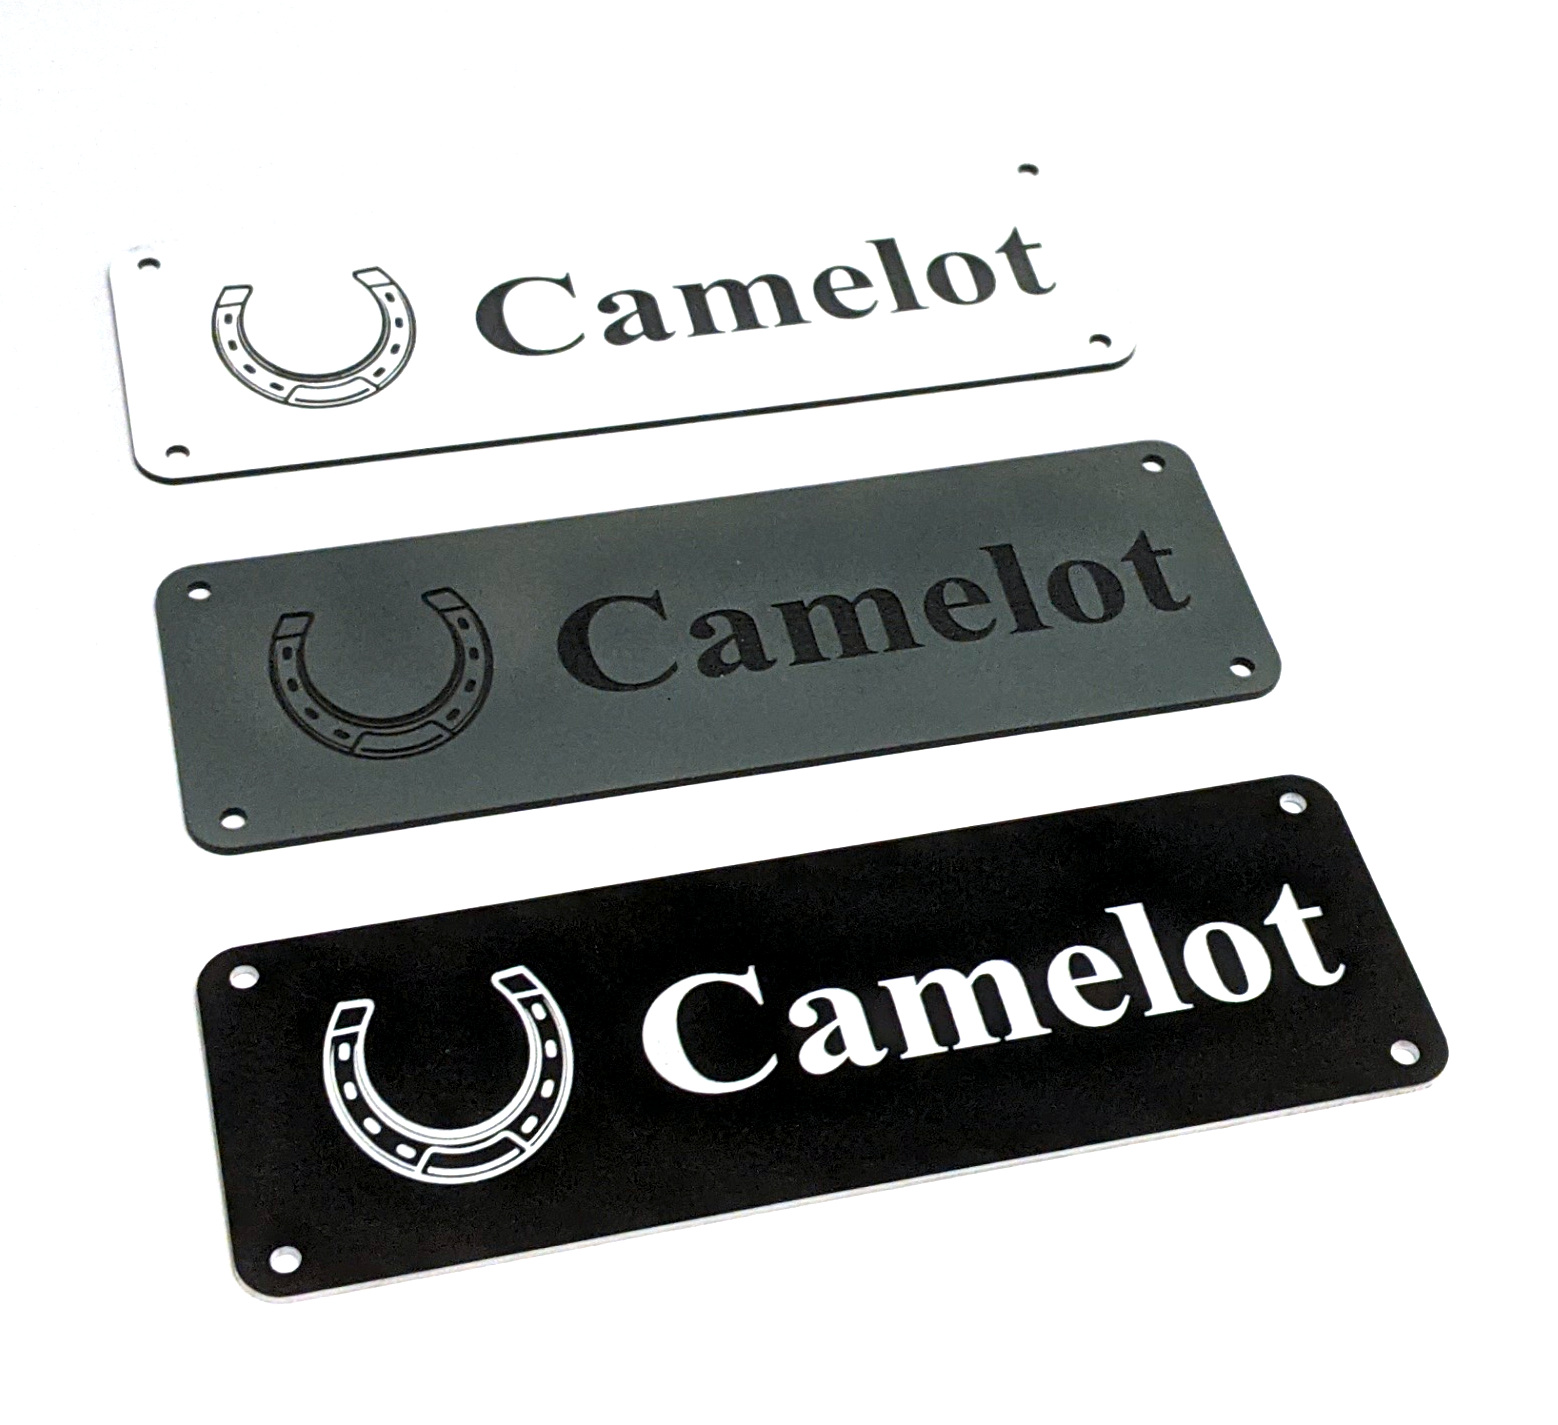 Personalised Stable Name Plaques - 6" x 2" with engraving of a Horseshoe on the Left-Hand side with contrasting name in the centre of the plaque, 4 screw holes in each corner.